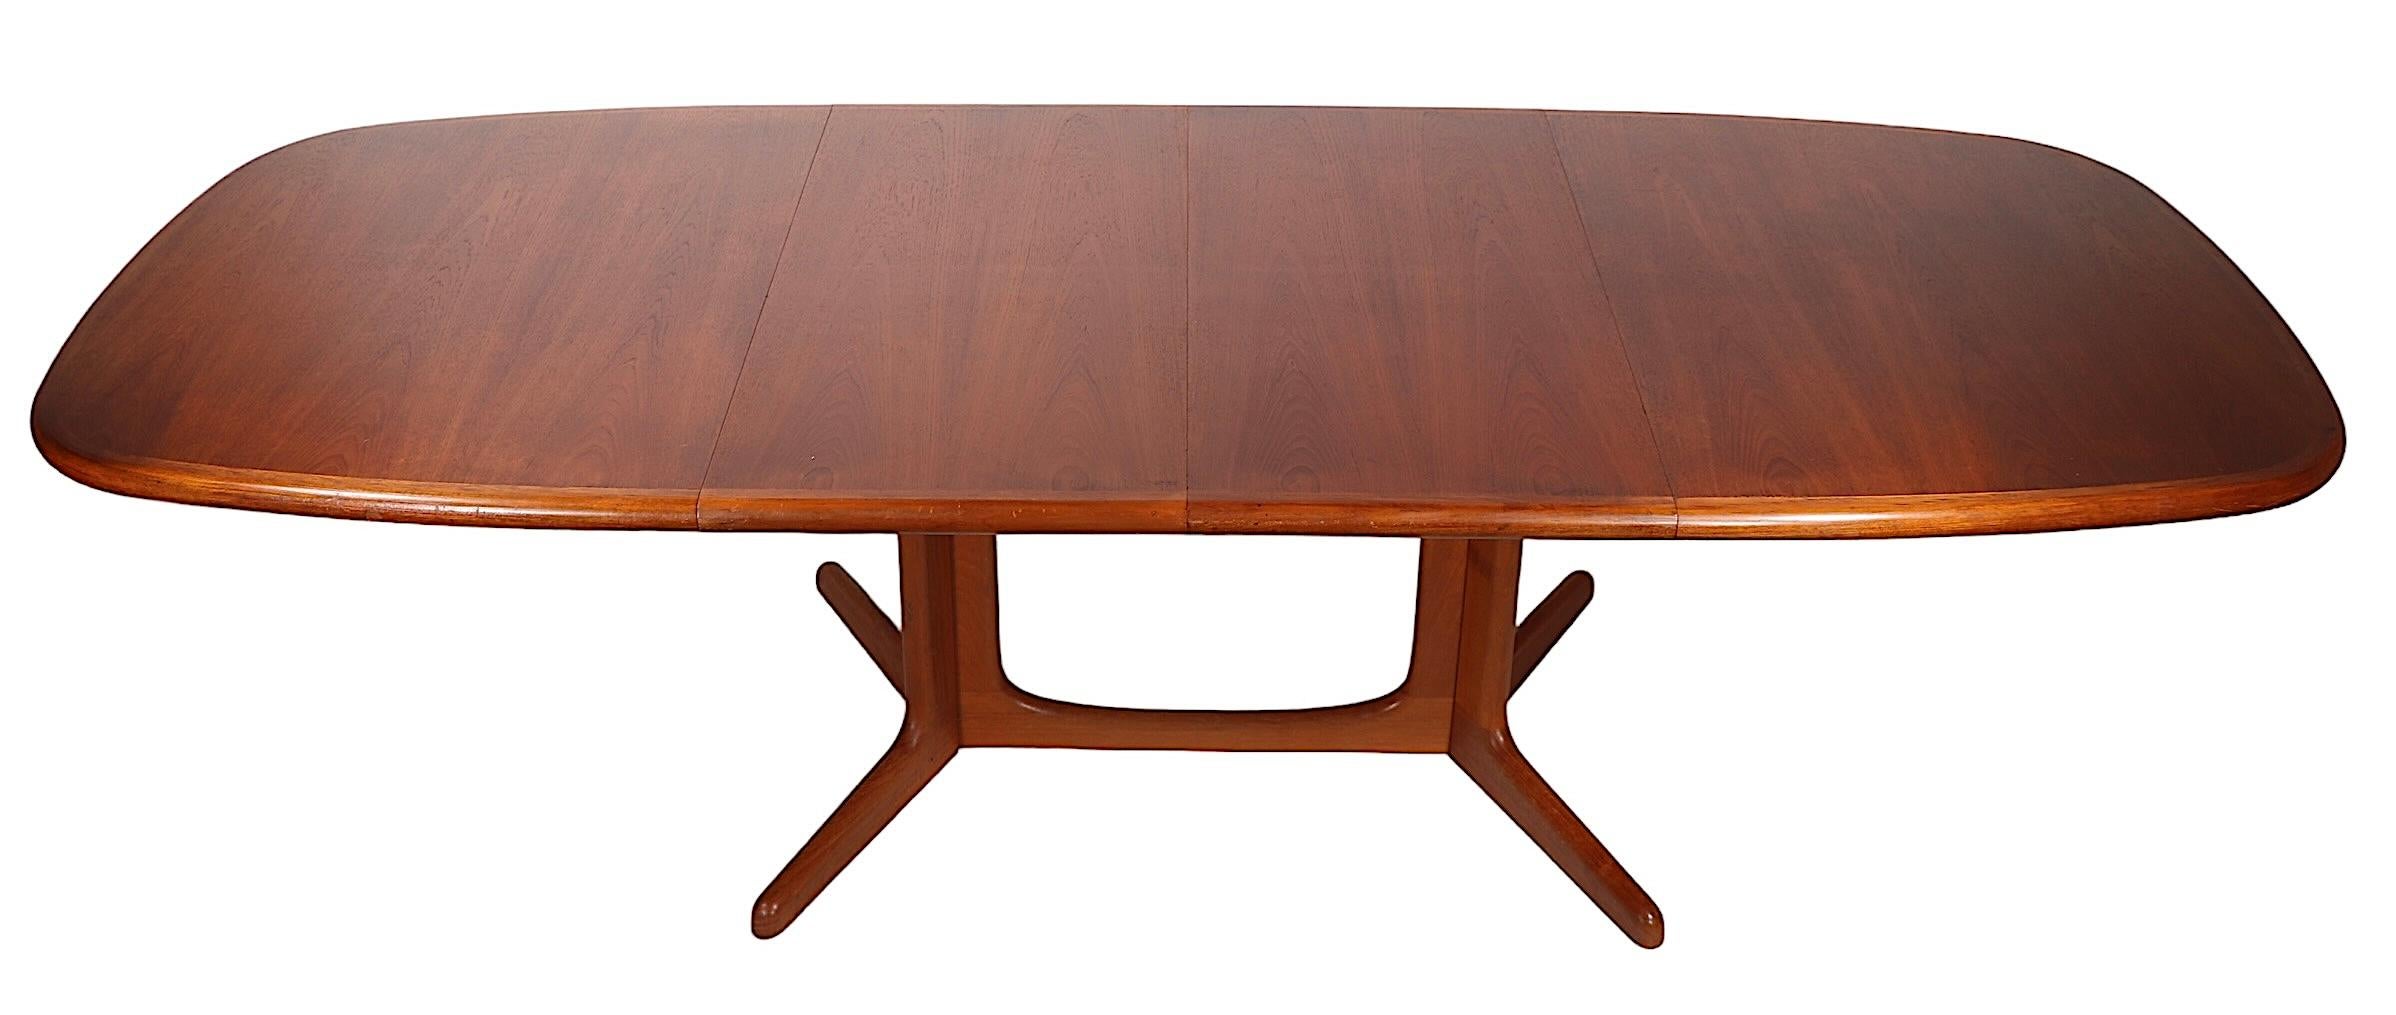 Danish Mid Century Oval Teak Dining Table by Niels Otto Moller for Gudme c 1970s For Sale 10